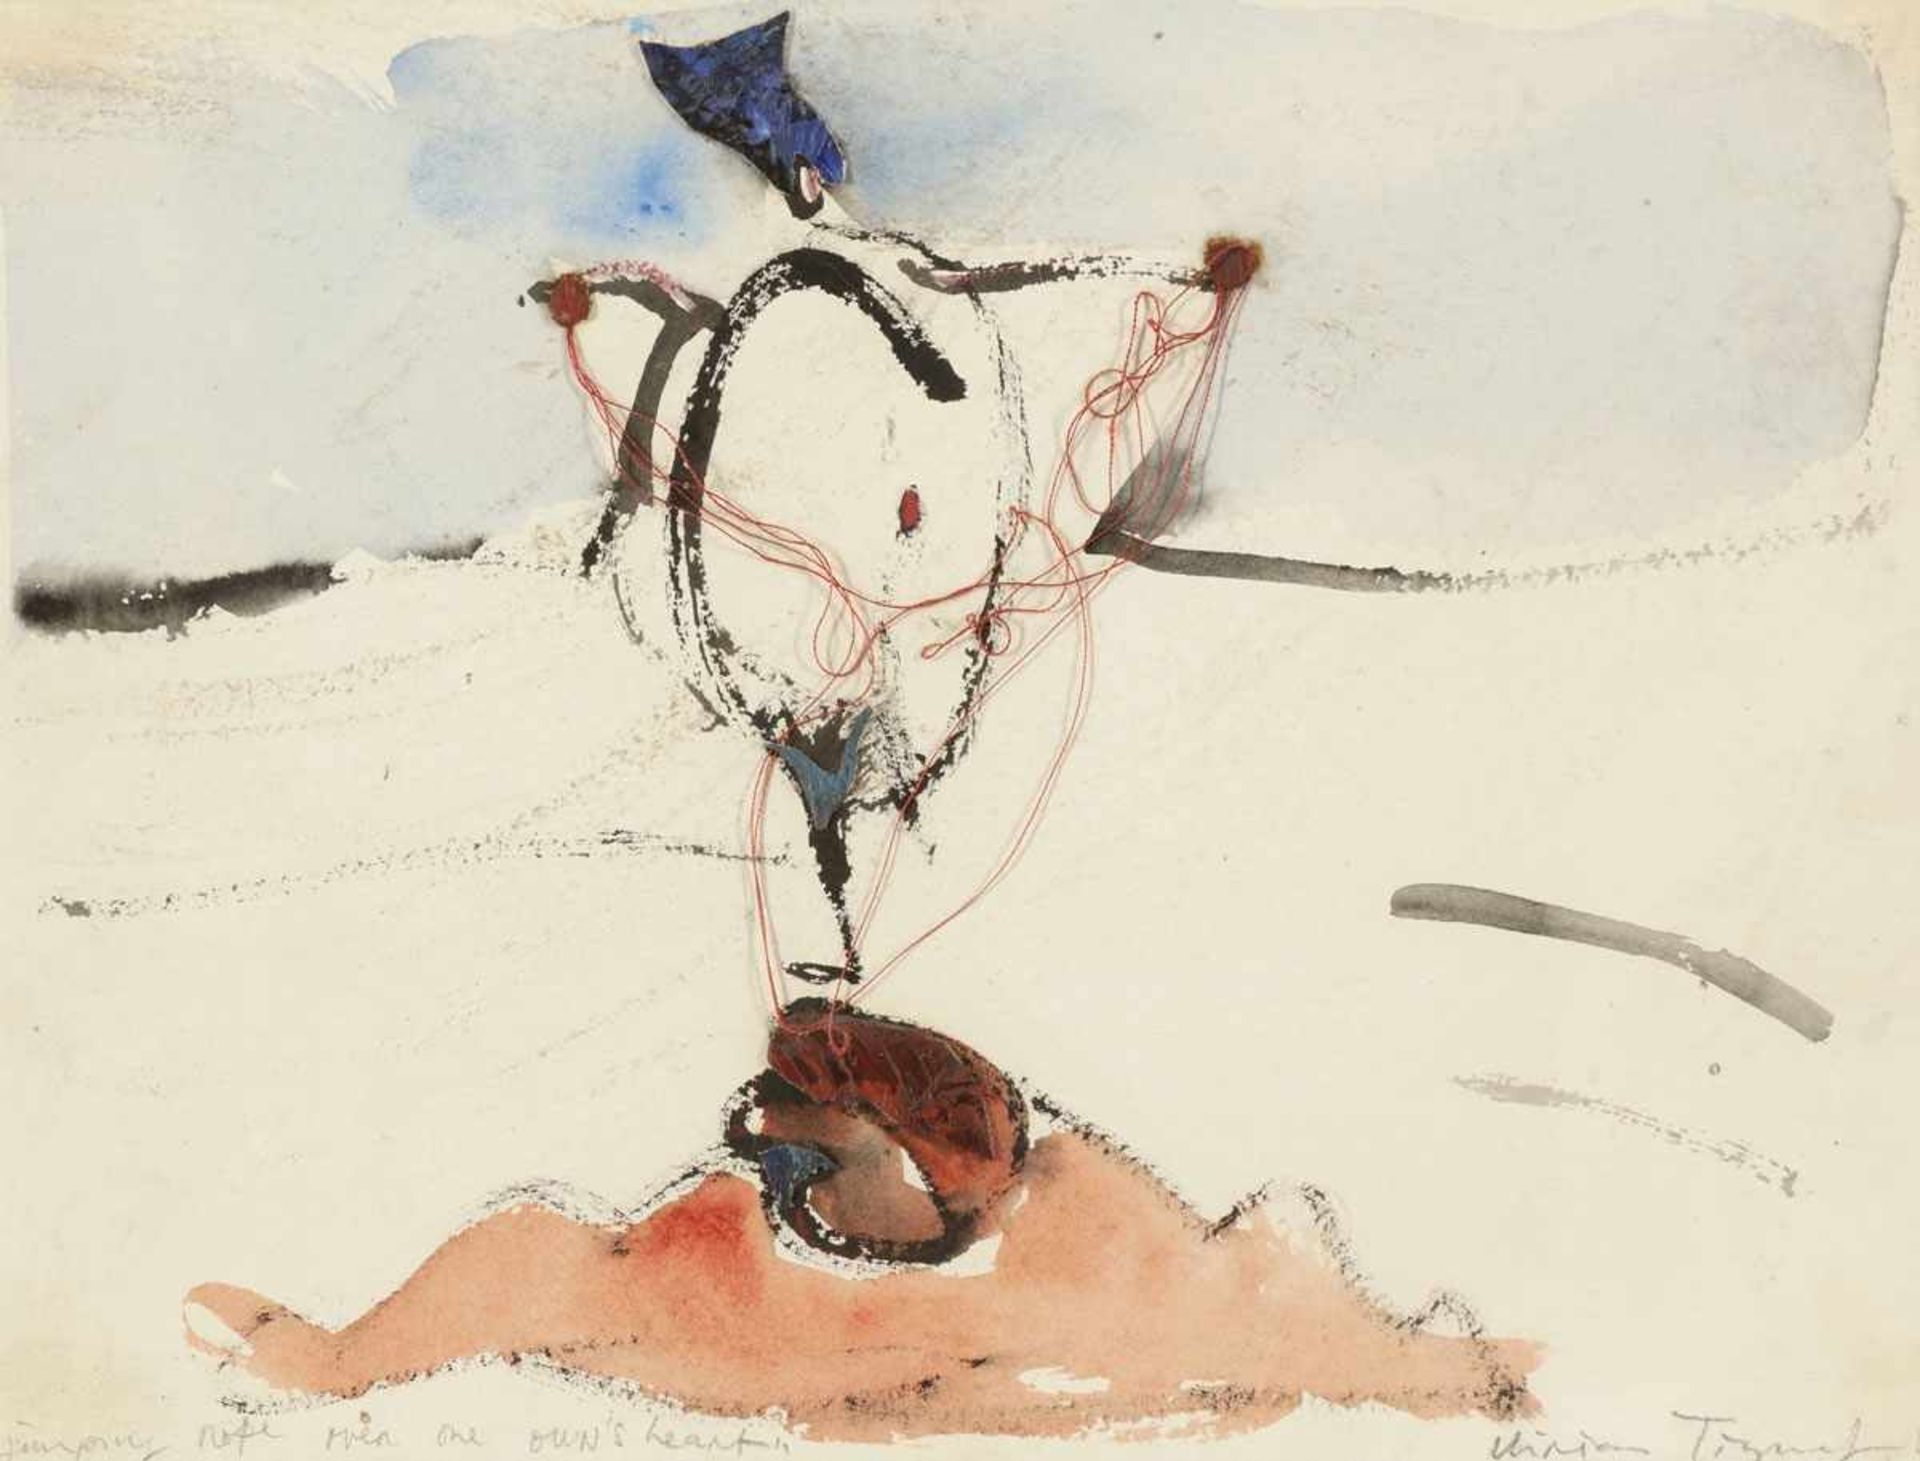 Miriam Tinguely 1950 Basel - "Jumping rope over one own's heart" - Aquarell und Collage/Papier. 22,5